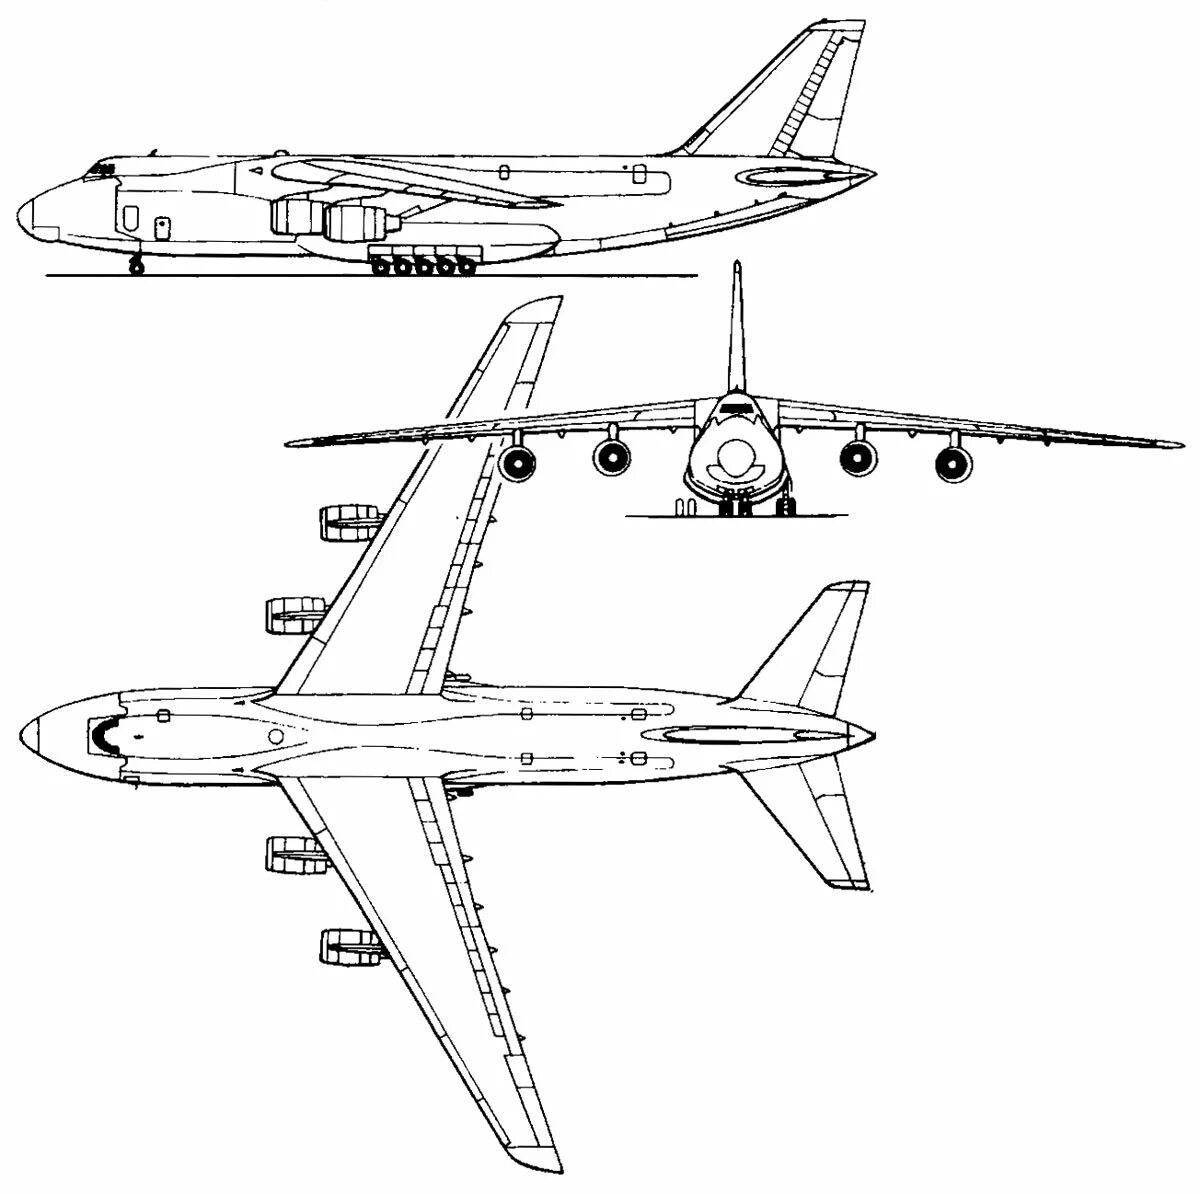 Coloring page of ruslan's plane